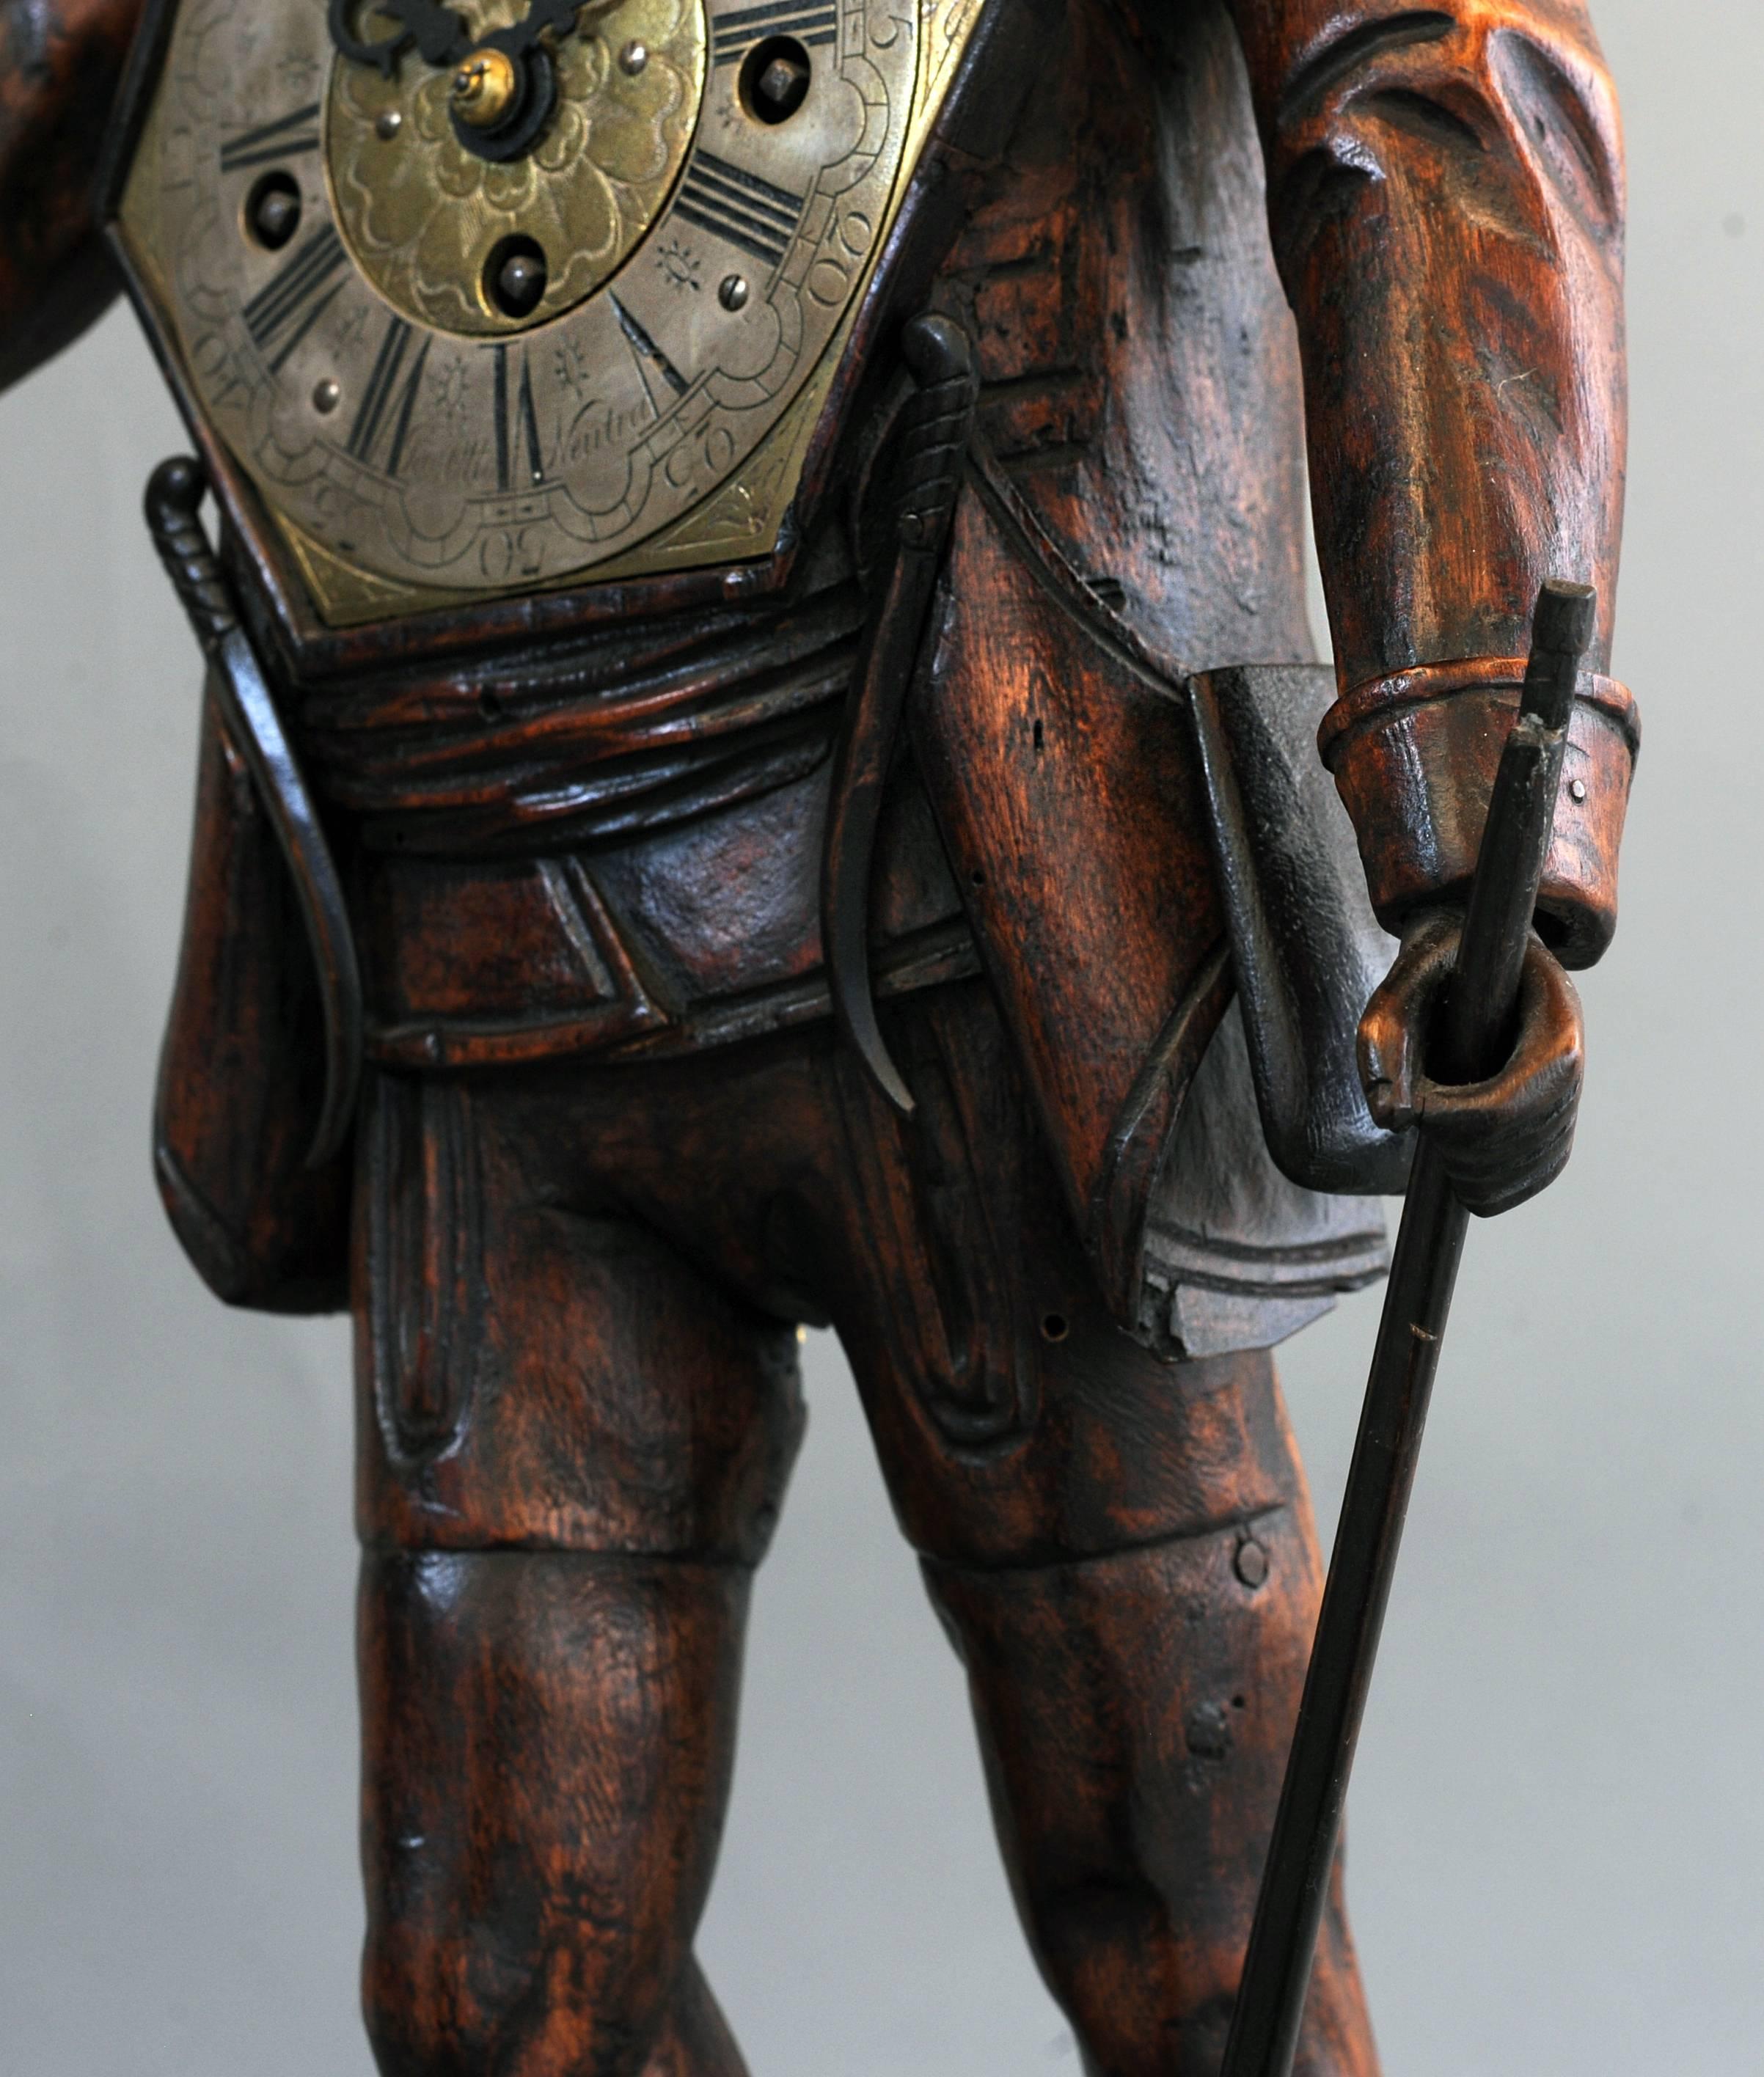 Hungarian Imposing Untouched Central Europe Soldier Figure, circa 1780, Signed J.O.Neutra For Sale